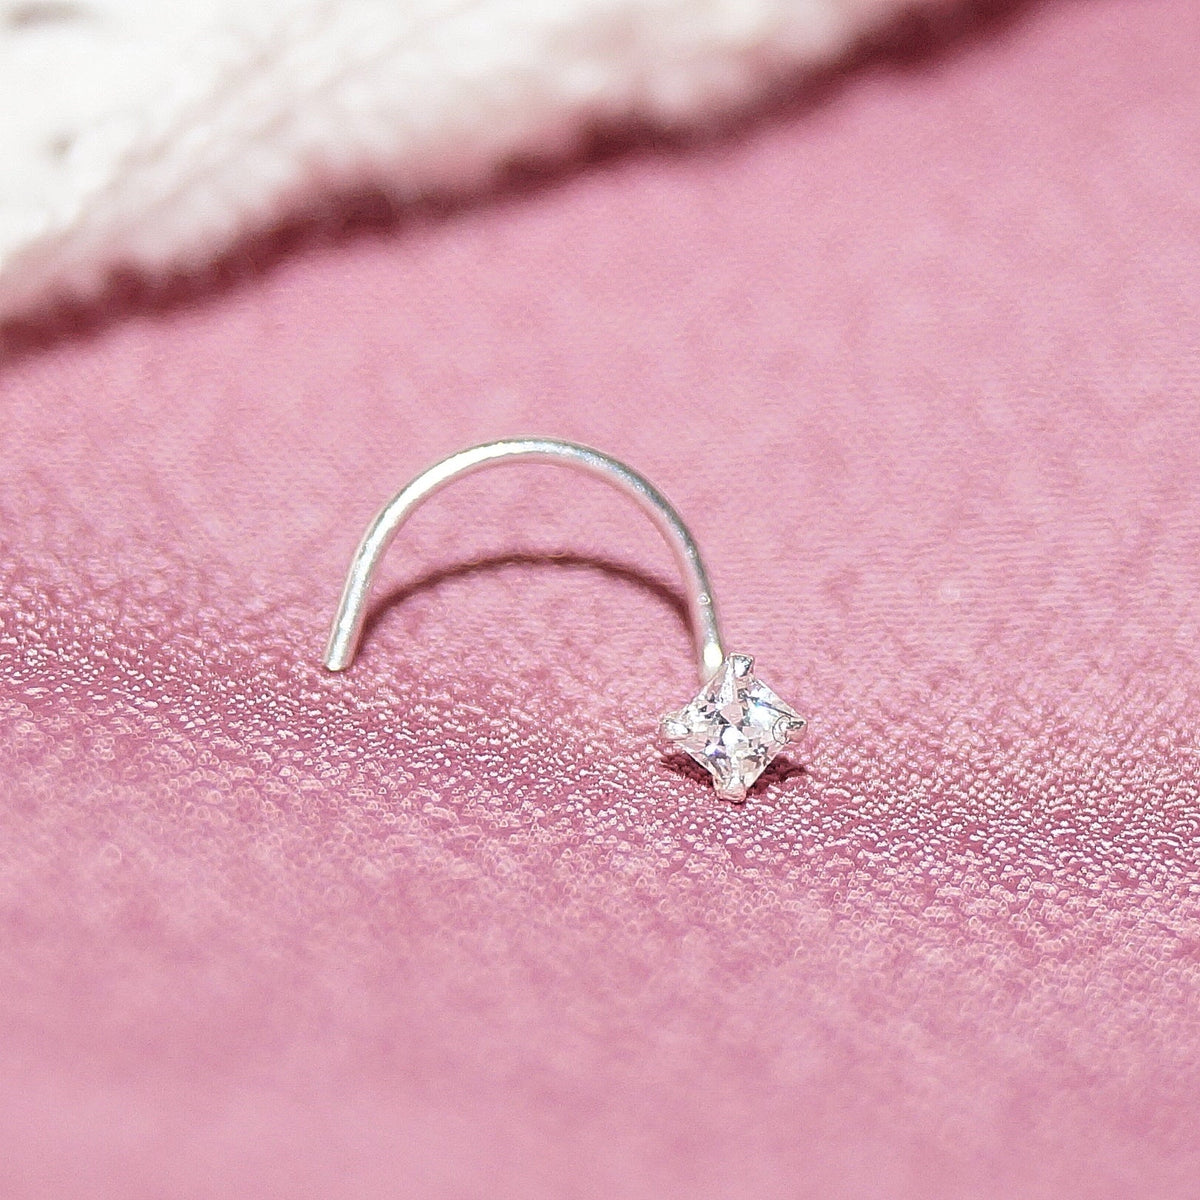 The Princess Cut Solitaire Nosepin (2mm)